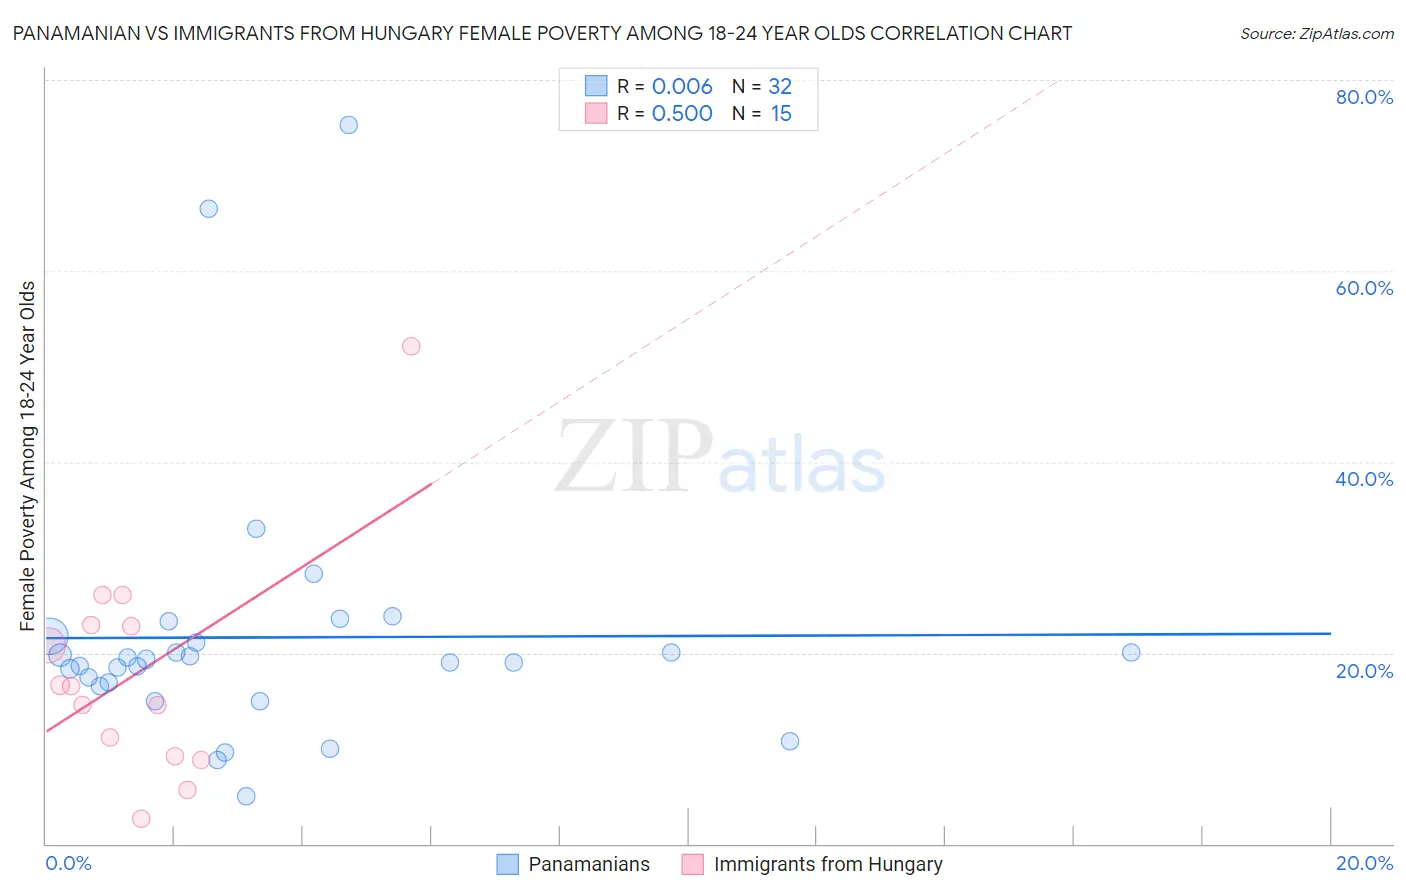 Panamanian vs Immigrants from Hungary Female Poverty Among 18-24 Year Olds